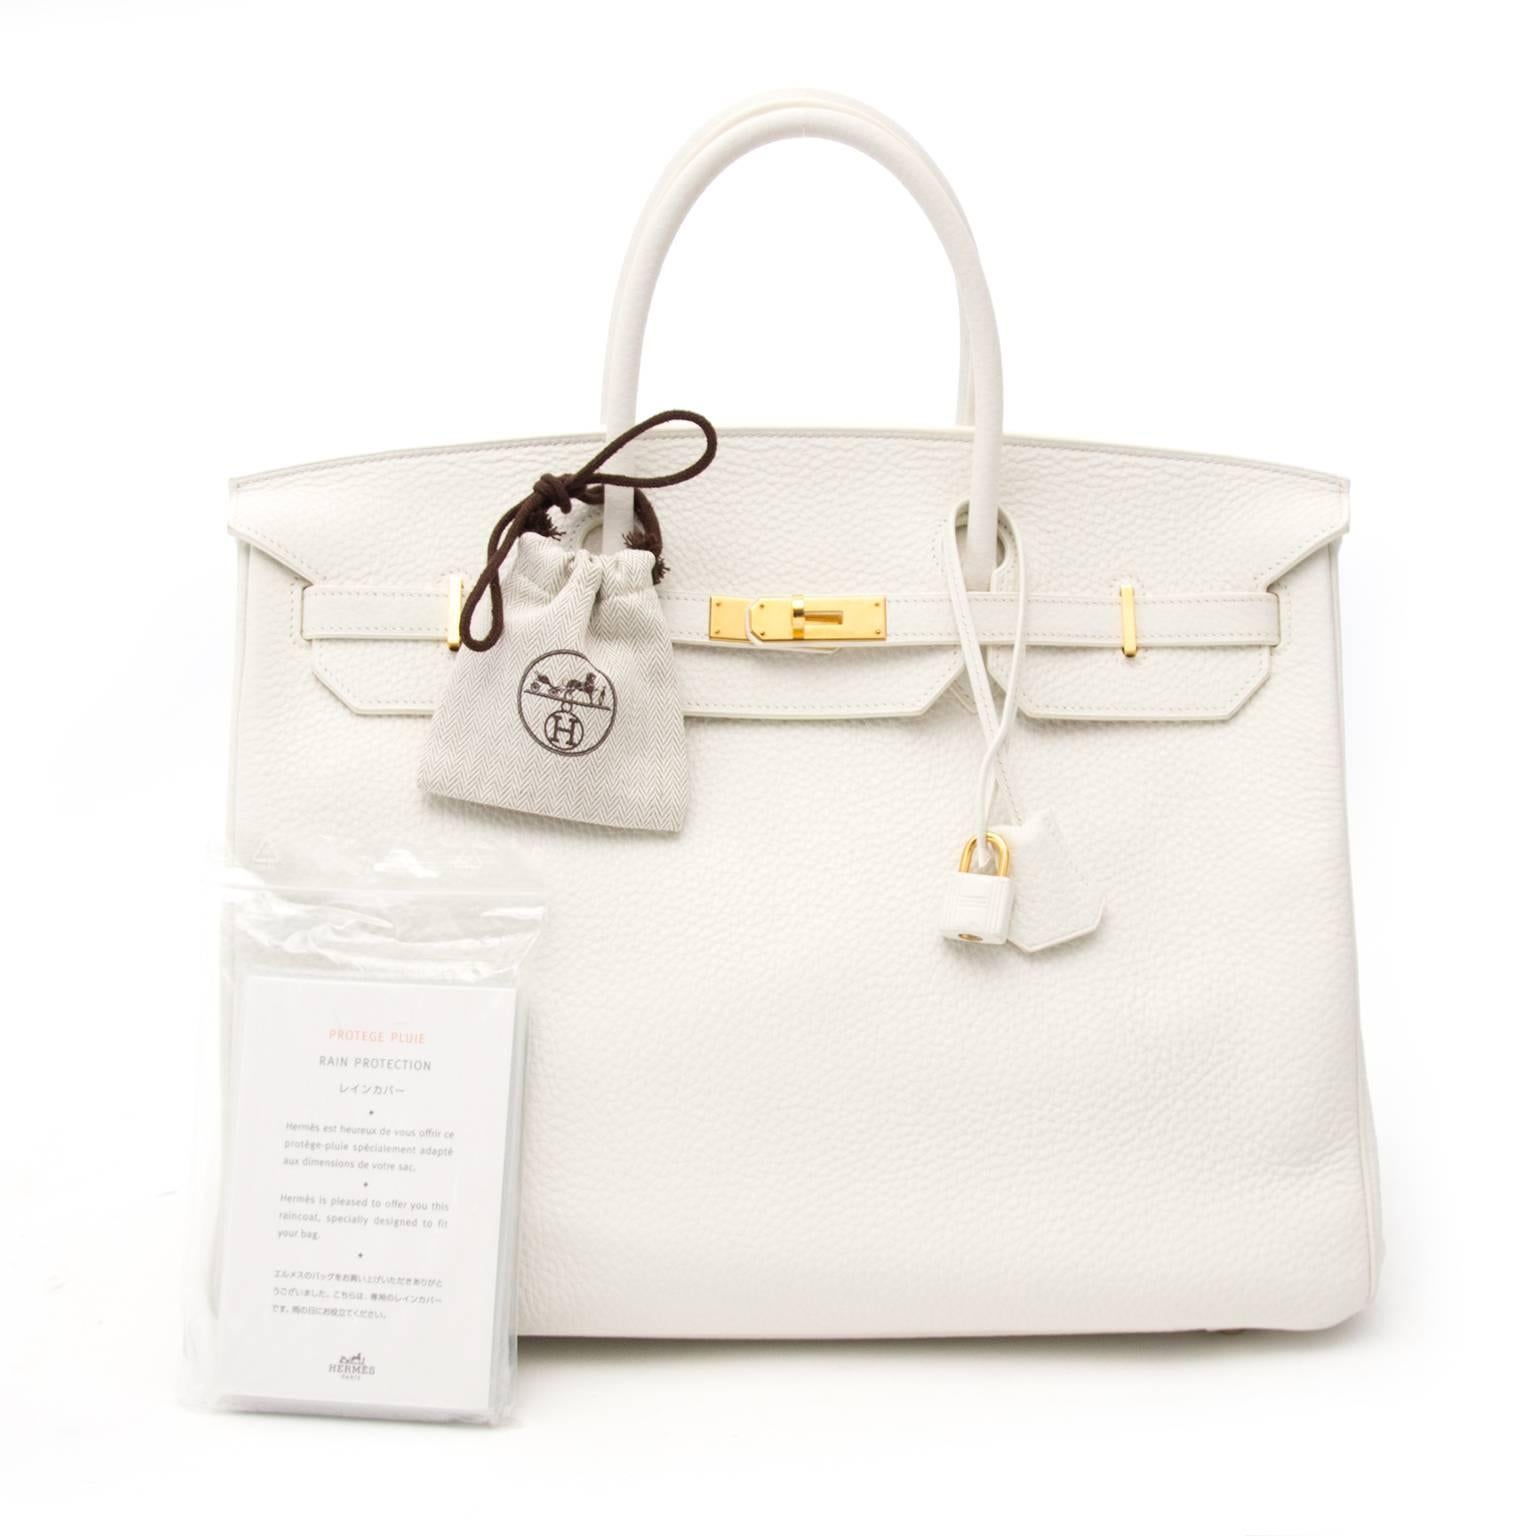 Very Good preloved condition

Hard to find Hermès White Birkin 40 Taurillon Clemense GHW

This White Hermès Birkin in Taurillon Clemence leather comes in a hard to find white color.
This type of leather has a slightly bigger grain then other